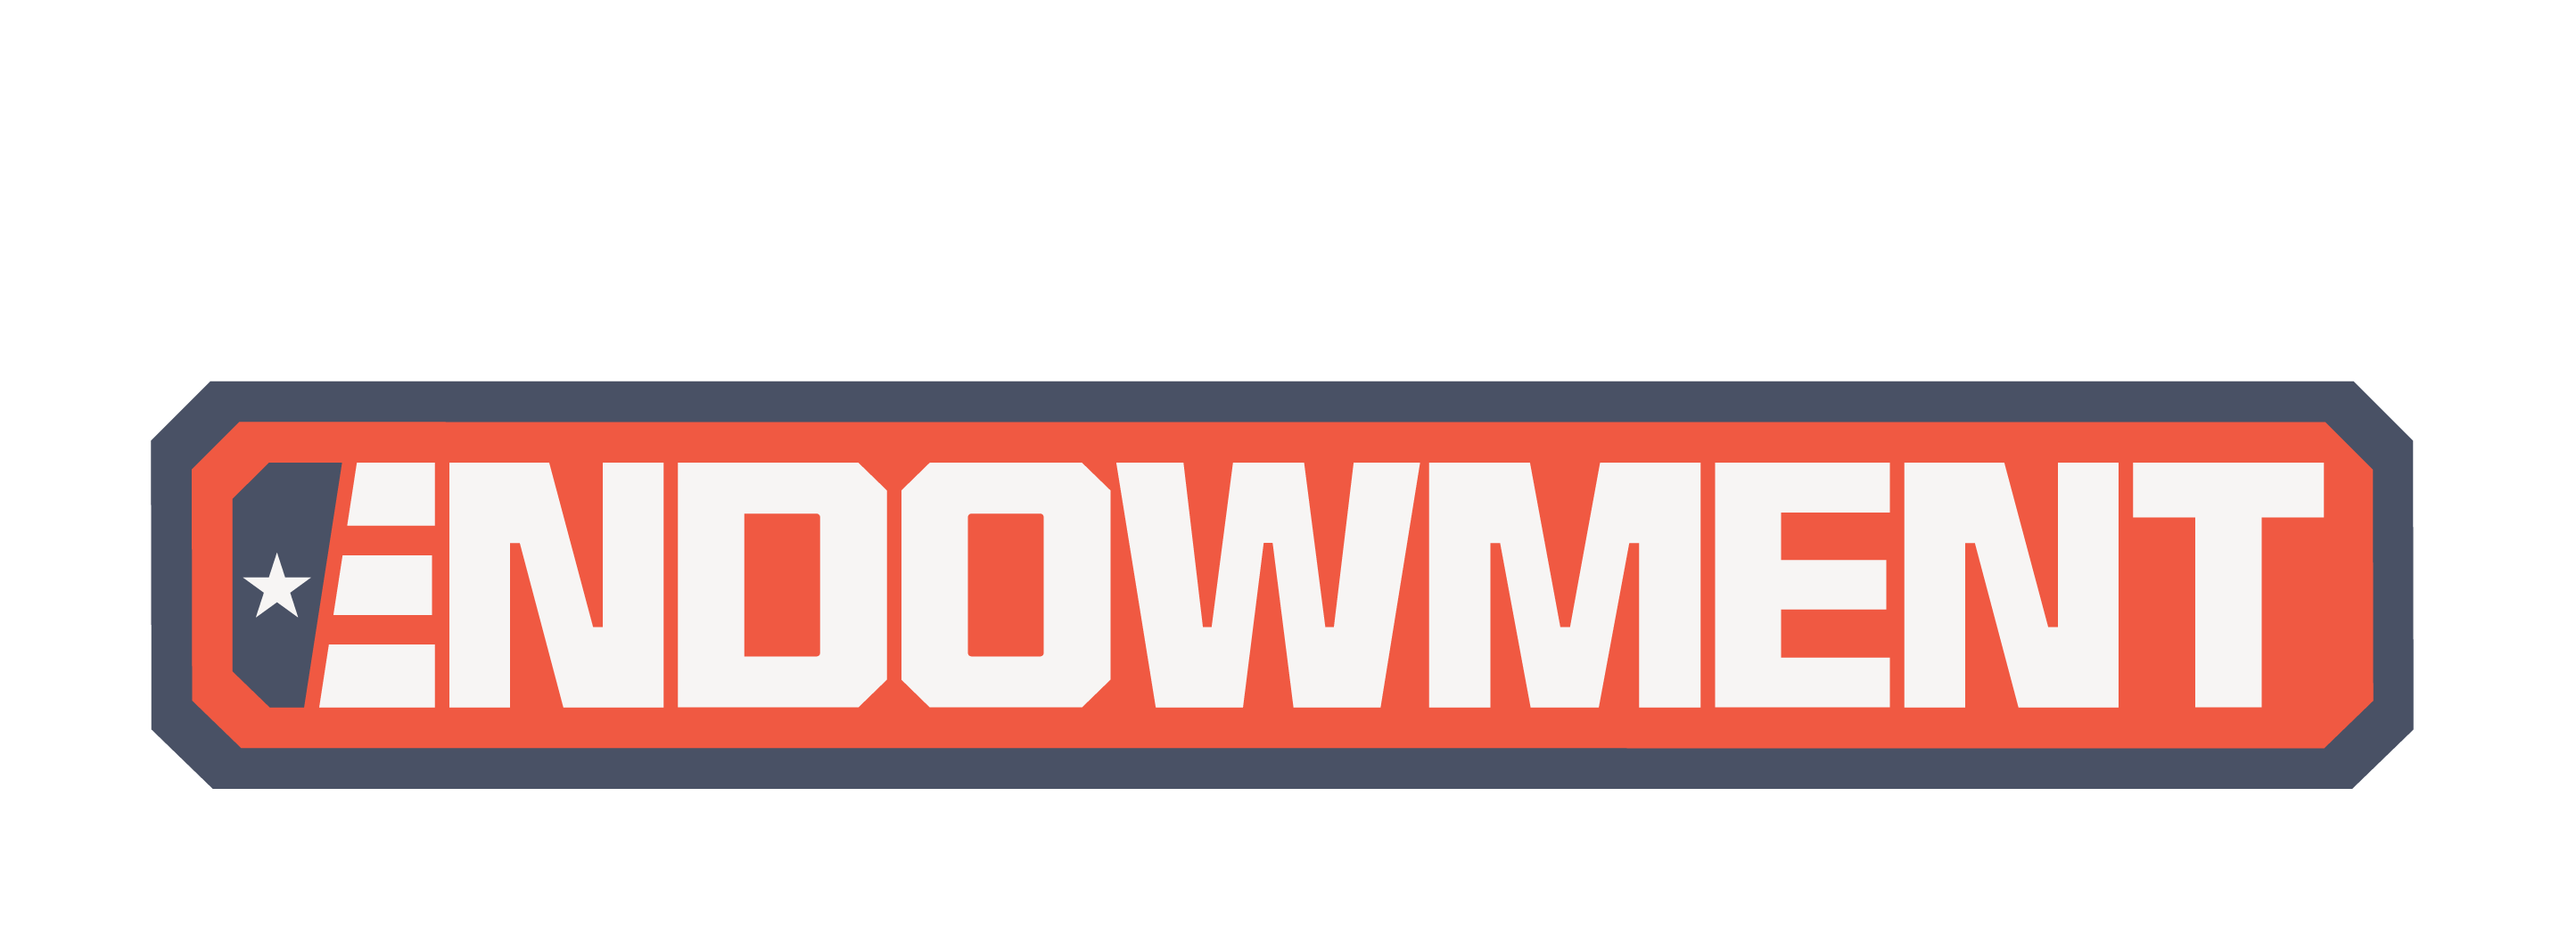 How do I find my Activision ID? — CoD Mobile Help Center